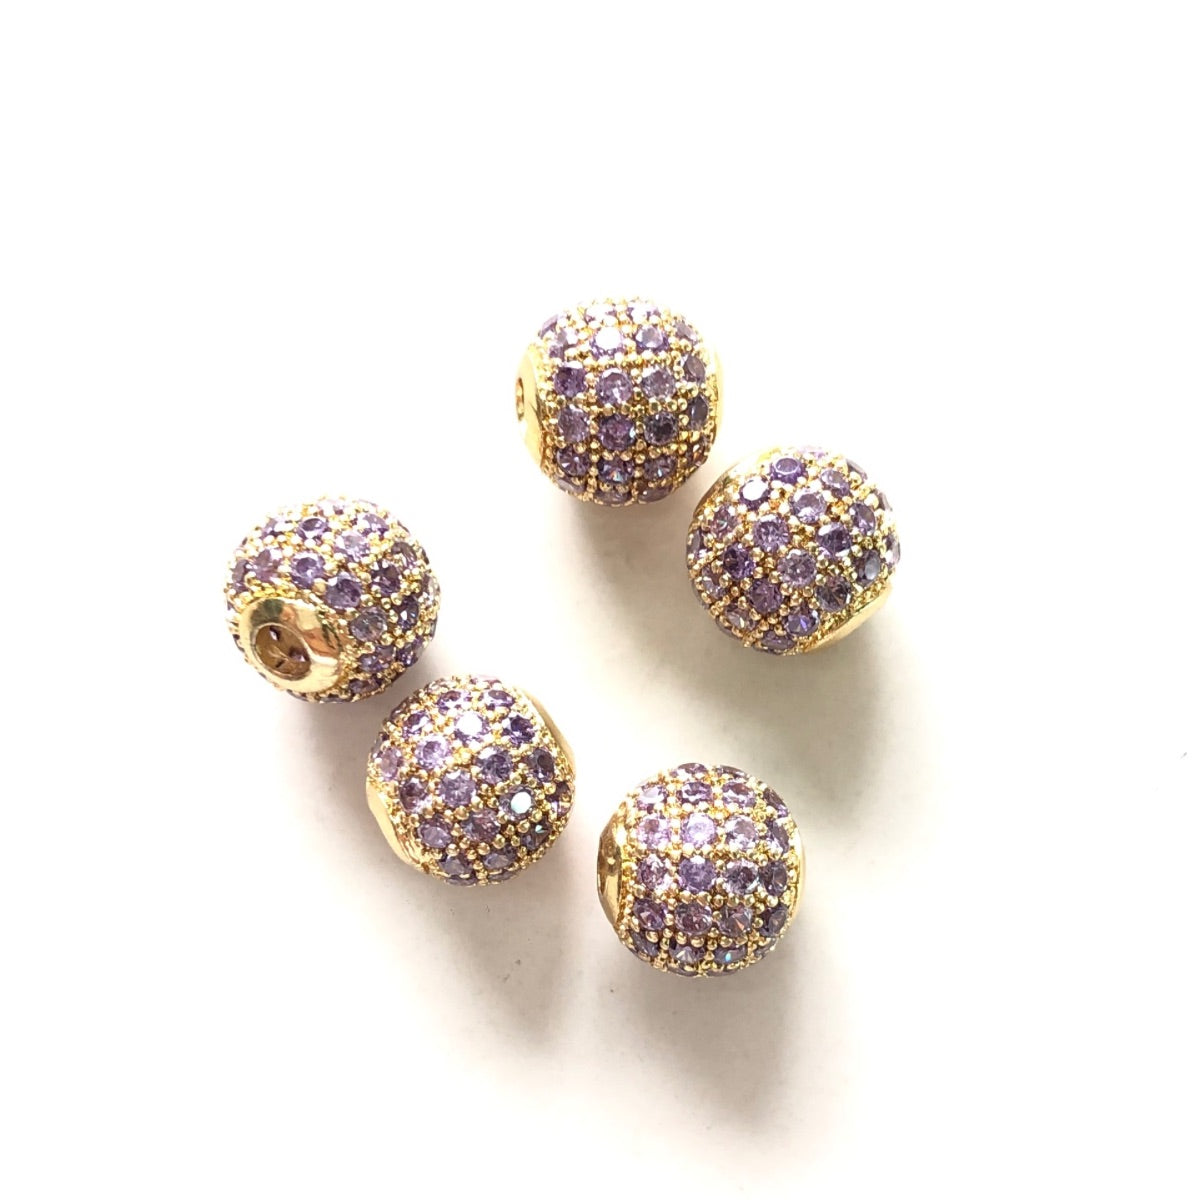 10pcs/lot 6mm, 8mm Colorful CZ Paved Ball Spacers Gold Purple CZ Paved Spacers 6mm Beads 8mm Beads Ball Beads Colorful Zirconia New Spacers Arrivals Charms Beads Beyond